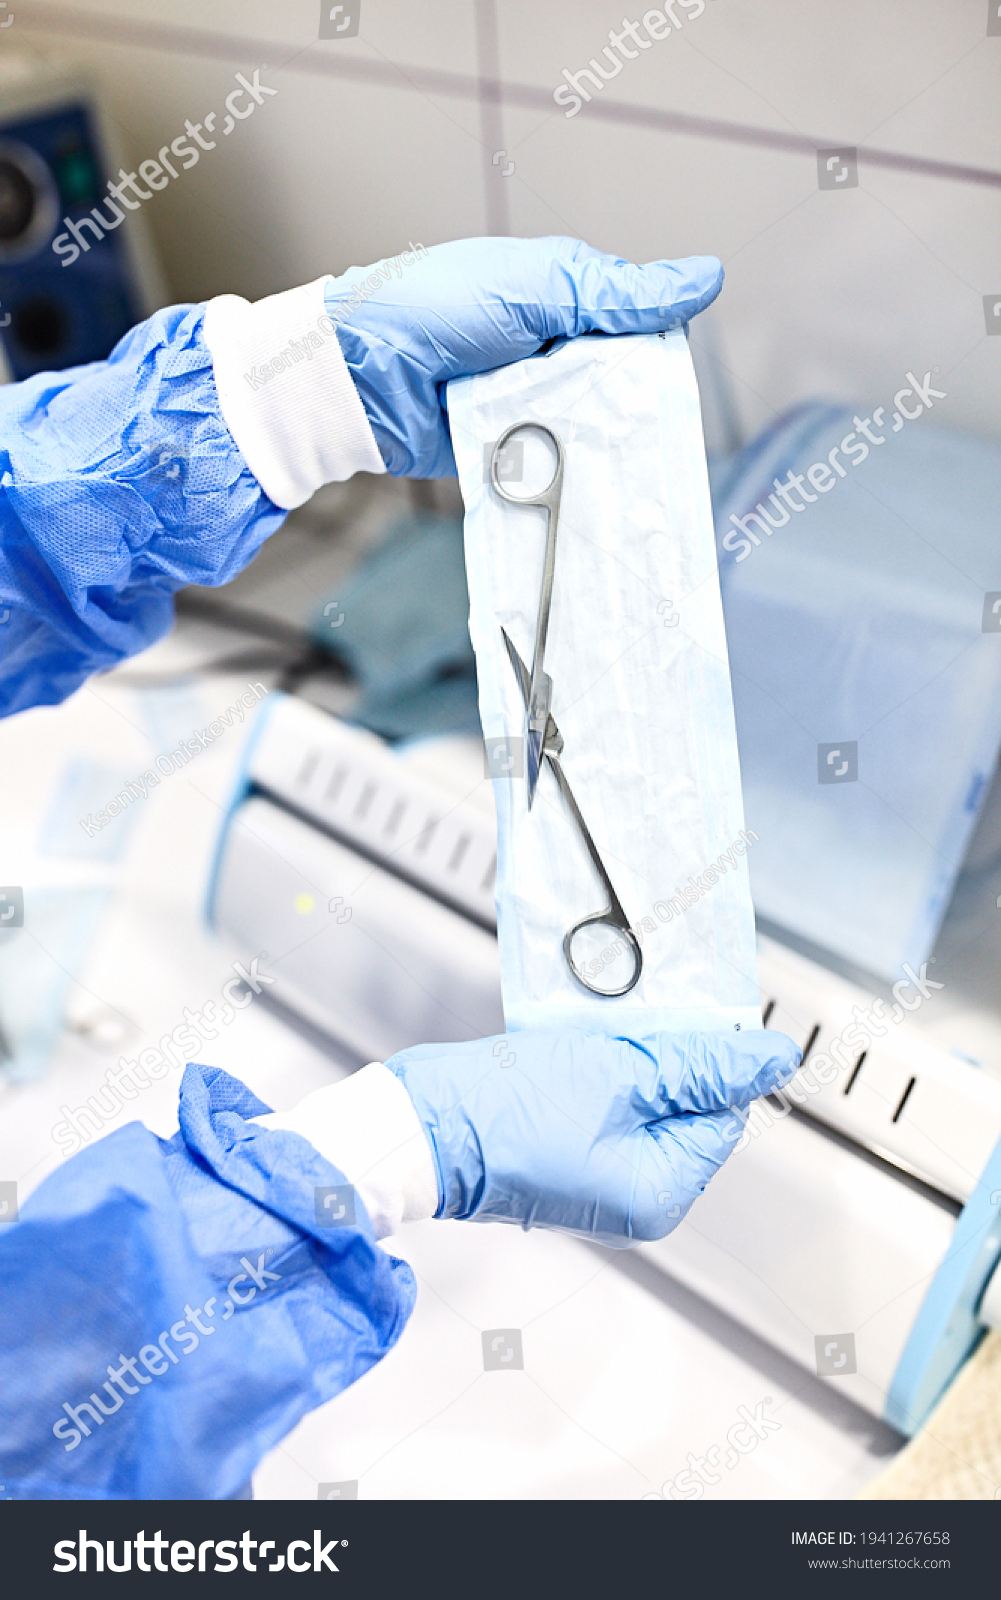 Sterilizing medical instruments in autoclave. Close up dentist assistant's hands holding packaged with vacuum packing machine medical instruments ready for sterilizing in autoclave. Medical scissors #1941267658